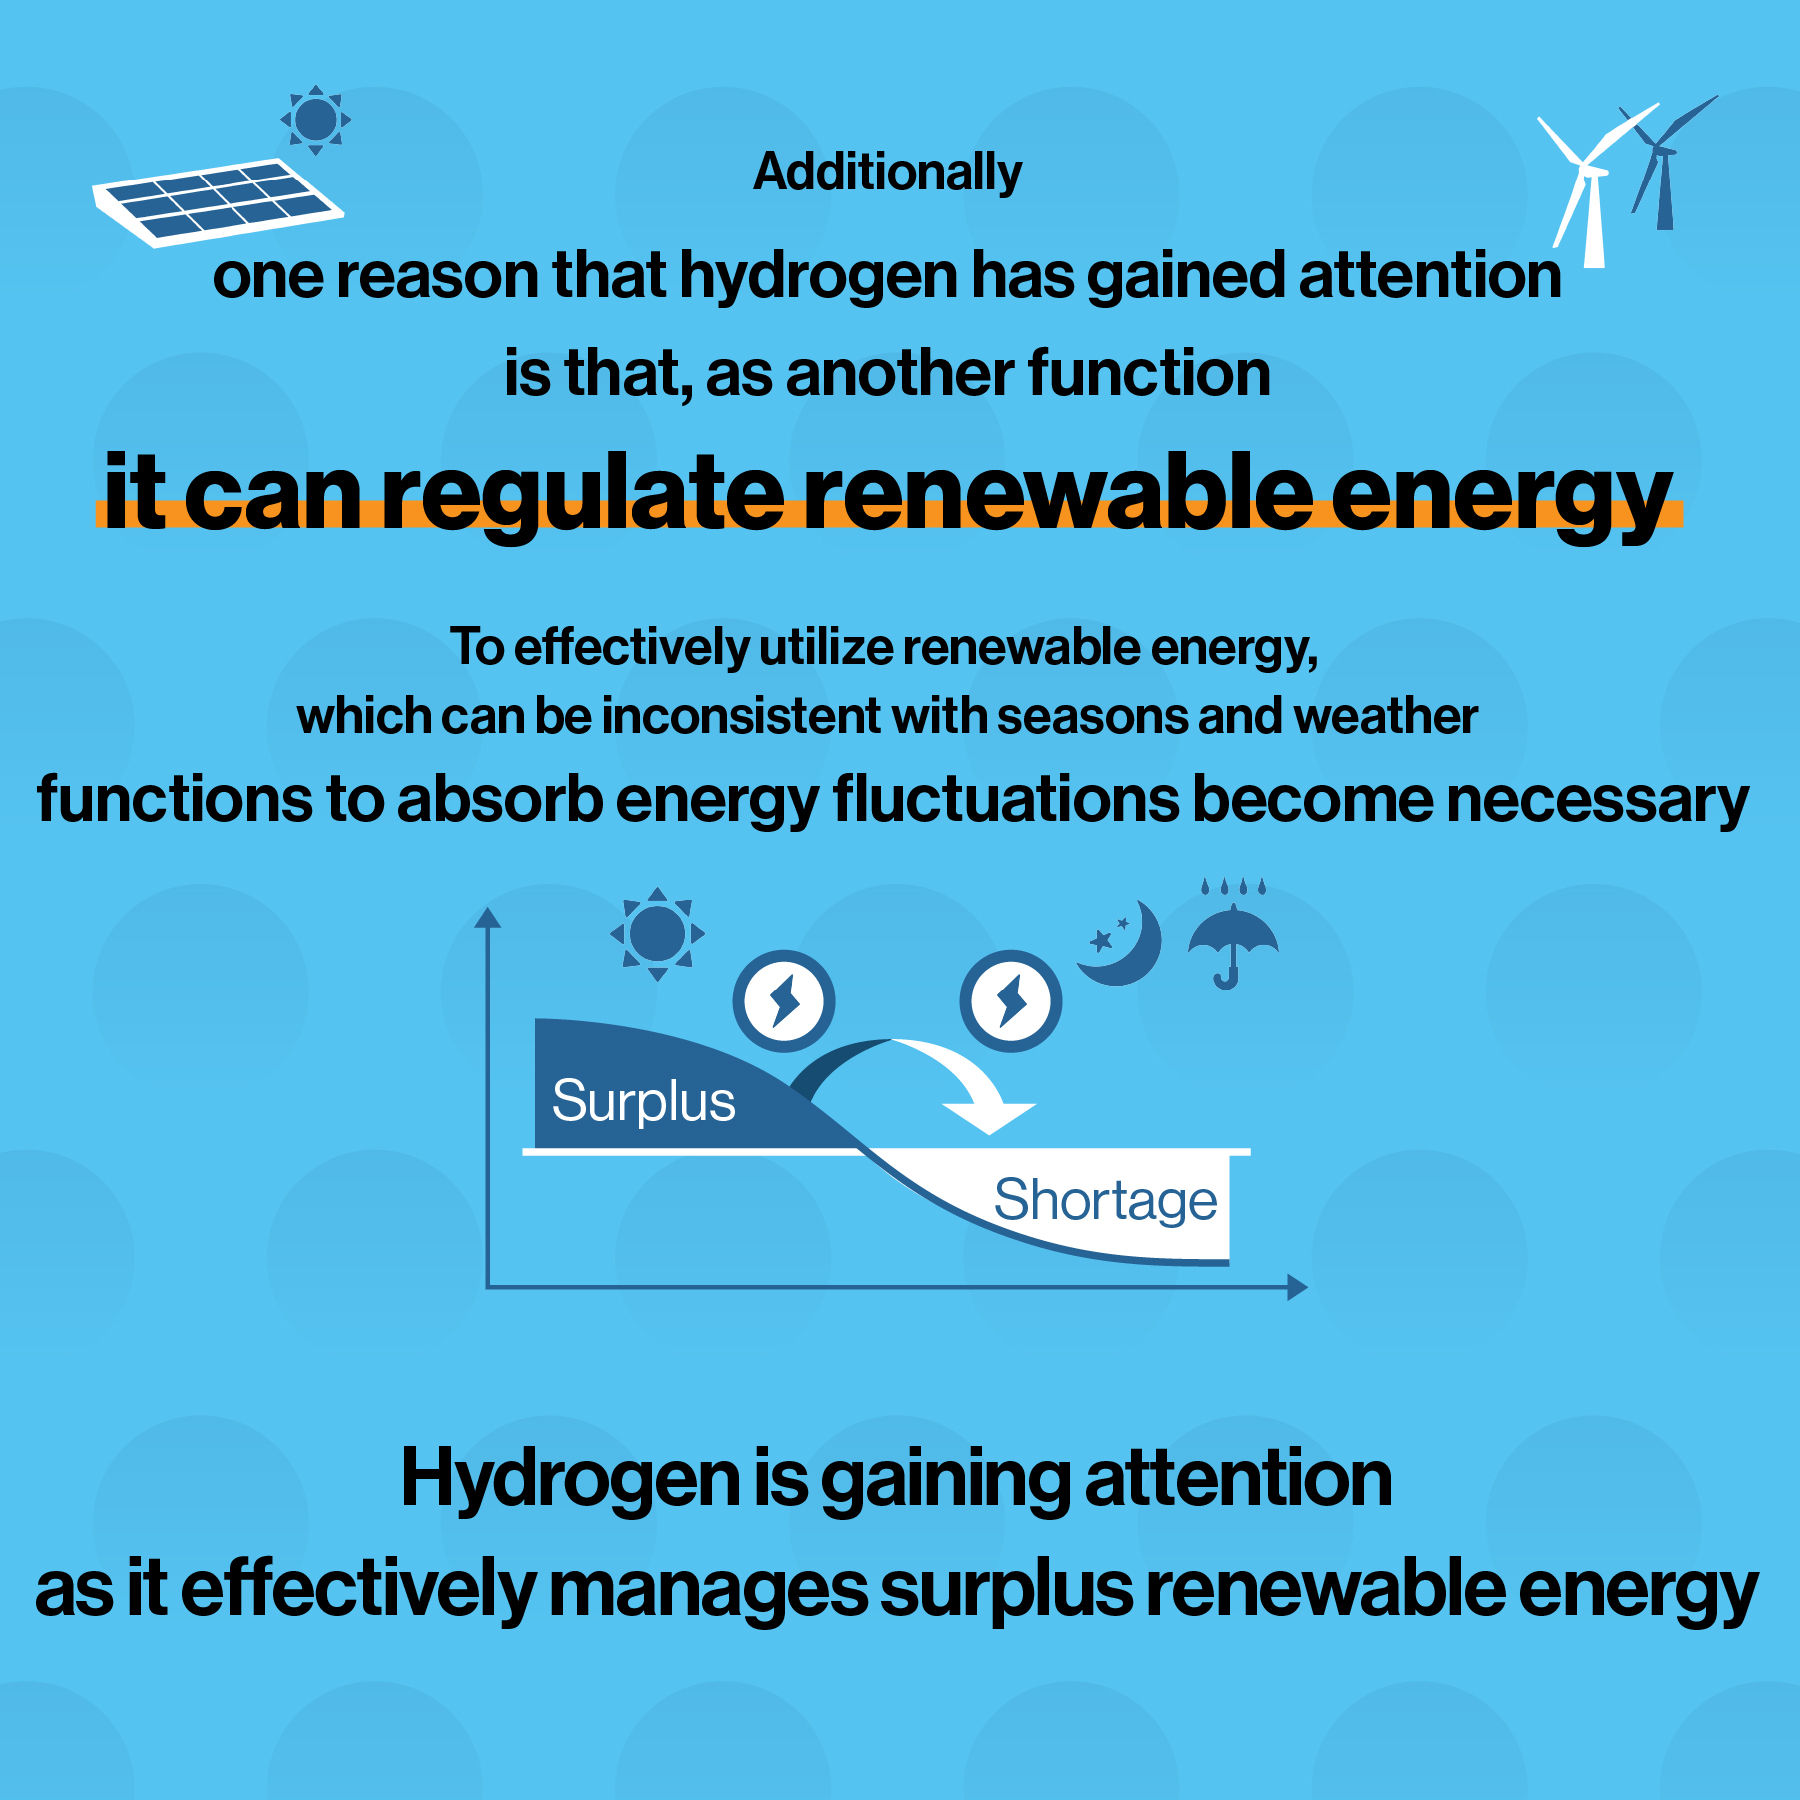 One role of hydrogen is as a regulator for renewable energy